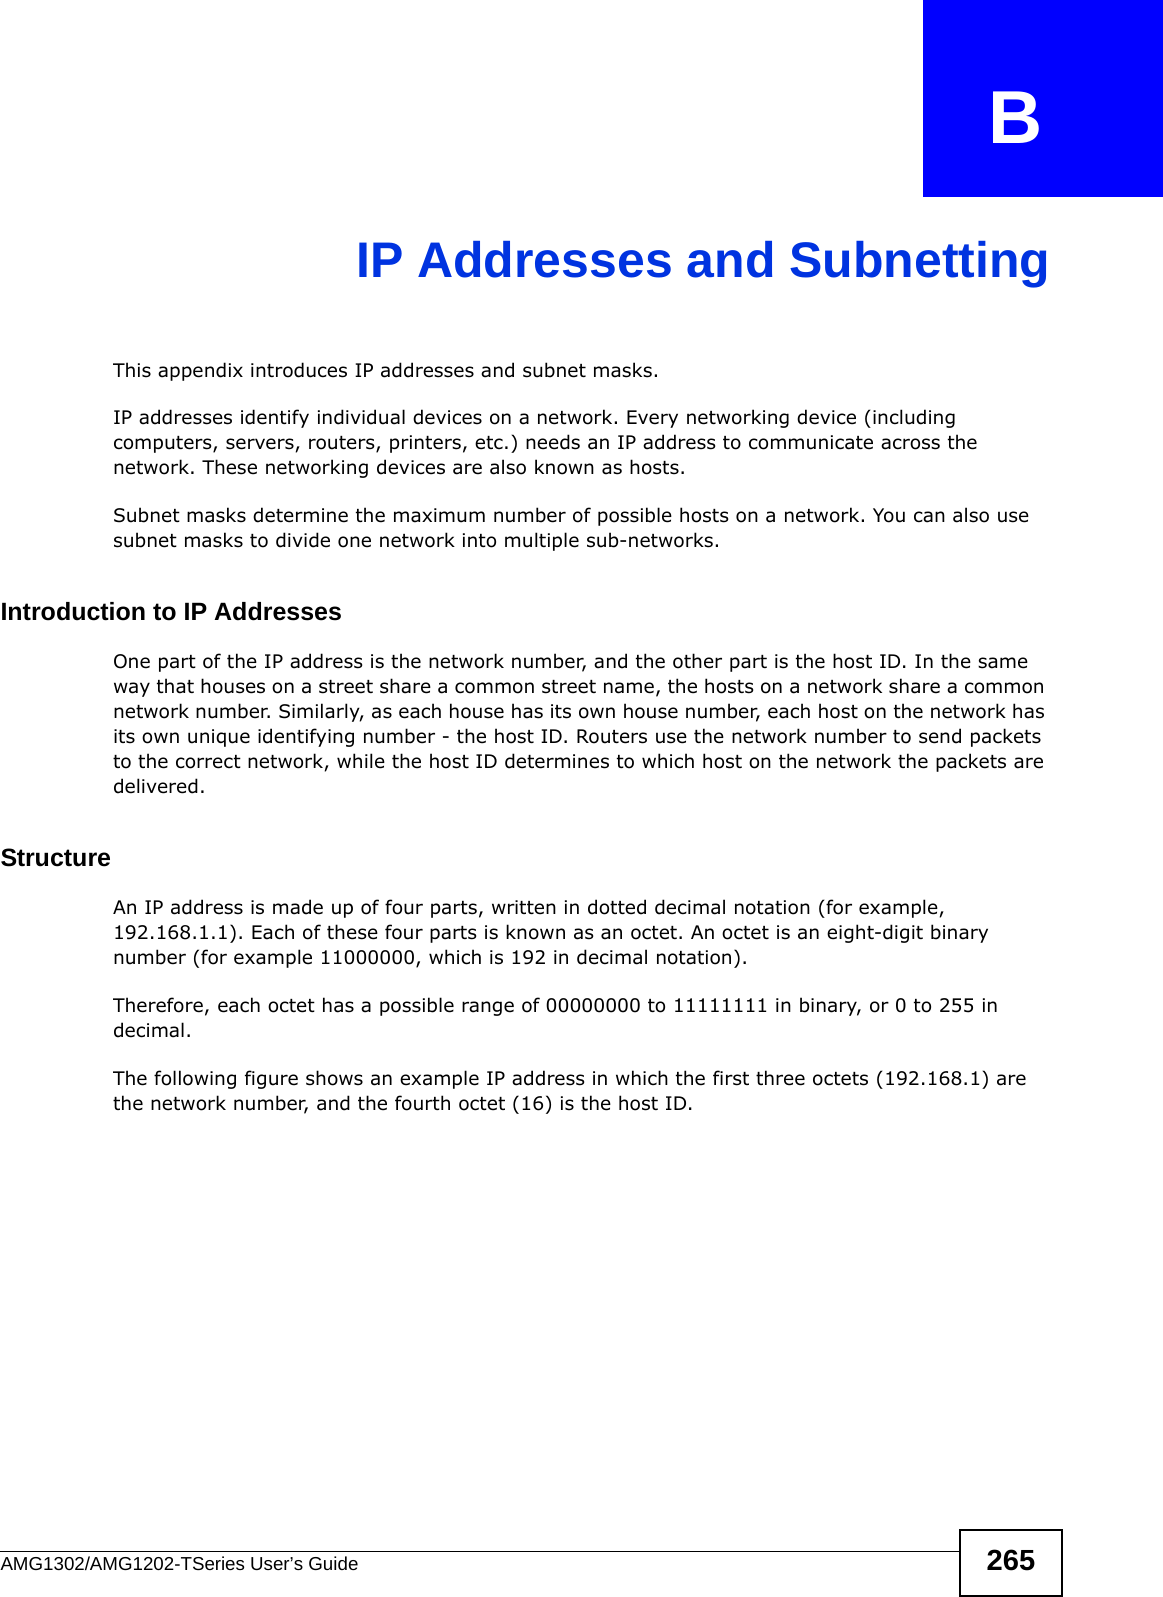 AMG1302/AMG1202-TSeries User’s Guide 265APPENDIX   BIP Addresses and SubnettingThis appendix introduces IP addresses and subnet masks. IP addresses identify individual devices on a network. Every networking device (including computers, servers, routers, printers, etc.) needs an IP address to communicate across the network. These networking devices are also known as hosts.Subnet masks determine the maximum number of possible hosts on a network. You can also use subnet masks to divide one network into multiple sub-networks.Introduction to IP AddressesOne part of the IP address is the network number, and the other part is the host ID. In the same way that houses on a street share a common street name, the hosts on a network share a common network number. Similarly, as each house has its own house number, each host on the network has its own unique identifying number - the host ID. Routers use the network number to send packets to the correct network, while the host ID determines to which host on the network the packets are delivered.StructureAn IP address is made up of four parts, written in dotted decimal notation (for example, 192.168.1.1). Each of these four parts is known as an octet. An octet is an eight-digit binary number (for example 11000000, which is 192 in decimal notation). Therefore, each octet has a possible range of 00000000 to 11111111 in binary, or 0 to 255 in decimal.The following figure shows an example IP address in which the first three octets (192.168.1) are the network number, and the fourth octet (16) is the host ID.